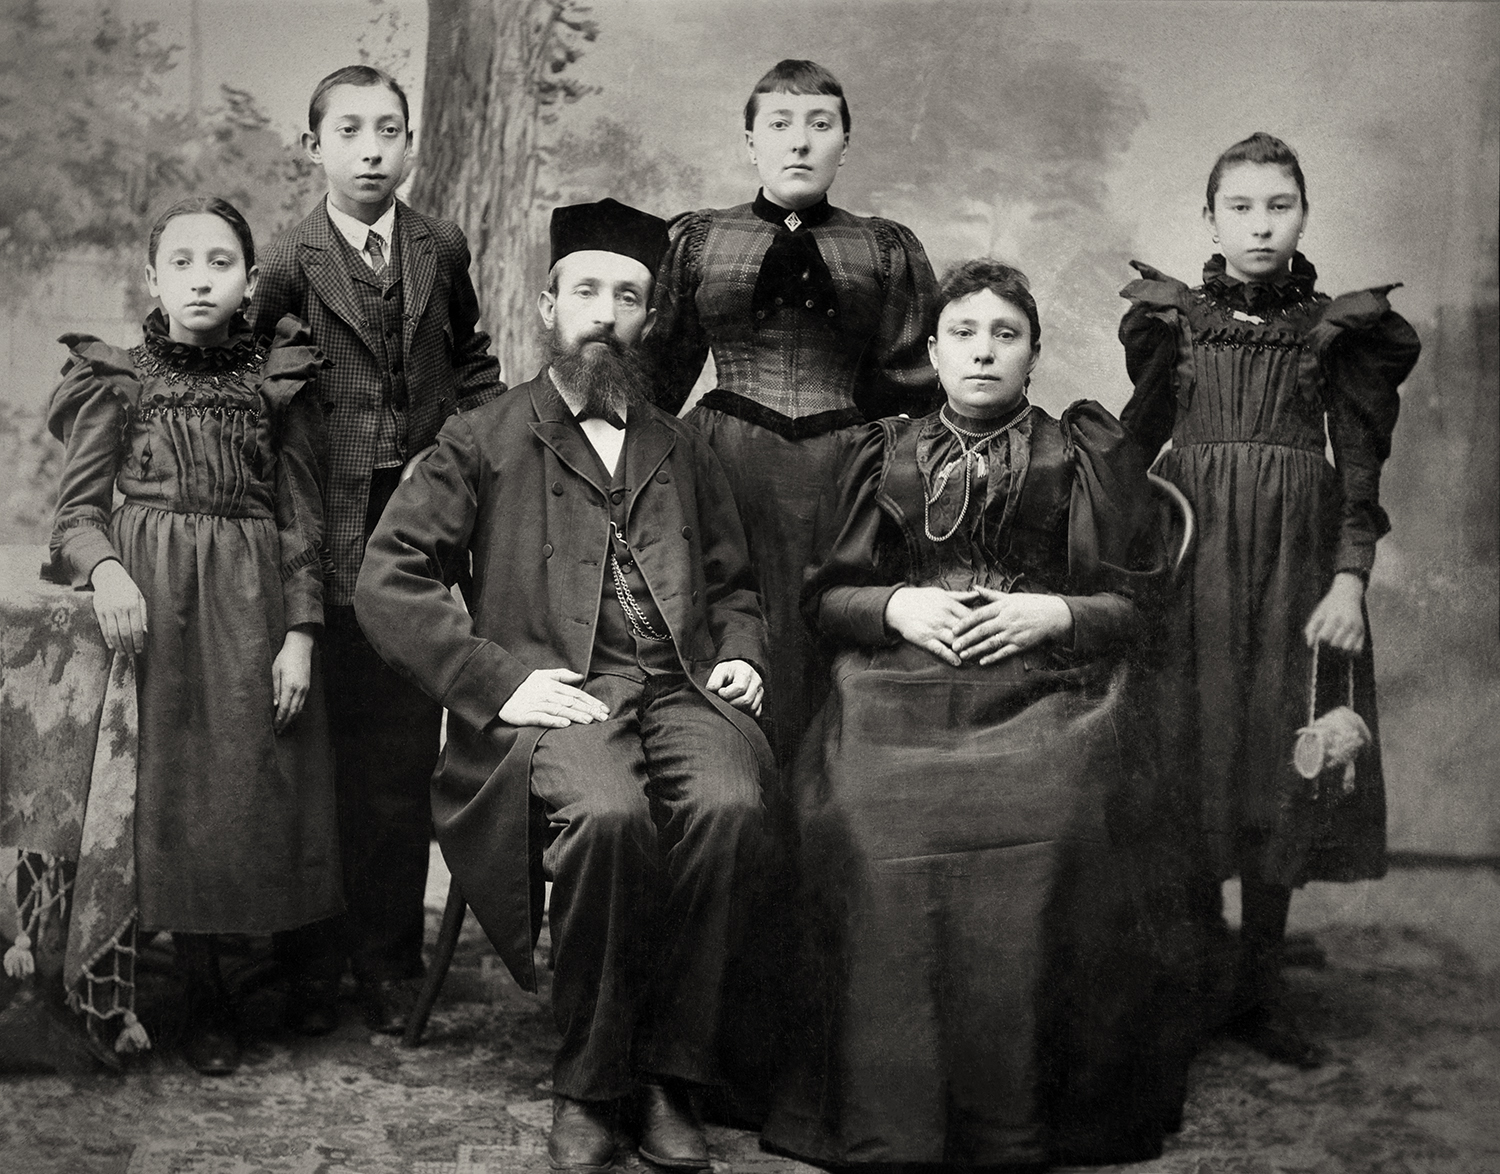 Adalman Family (Morris and Rachel seated; Hyman is 2nd from the left)